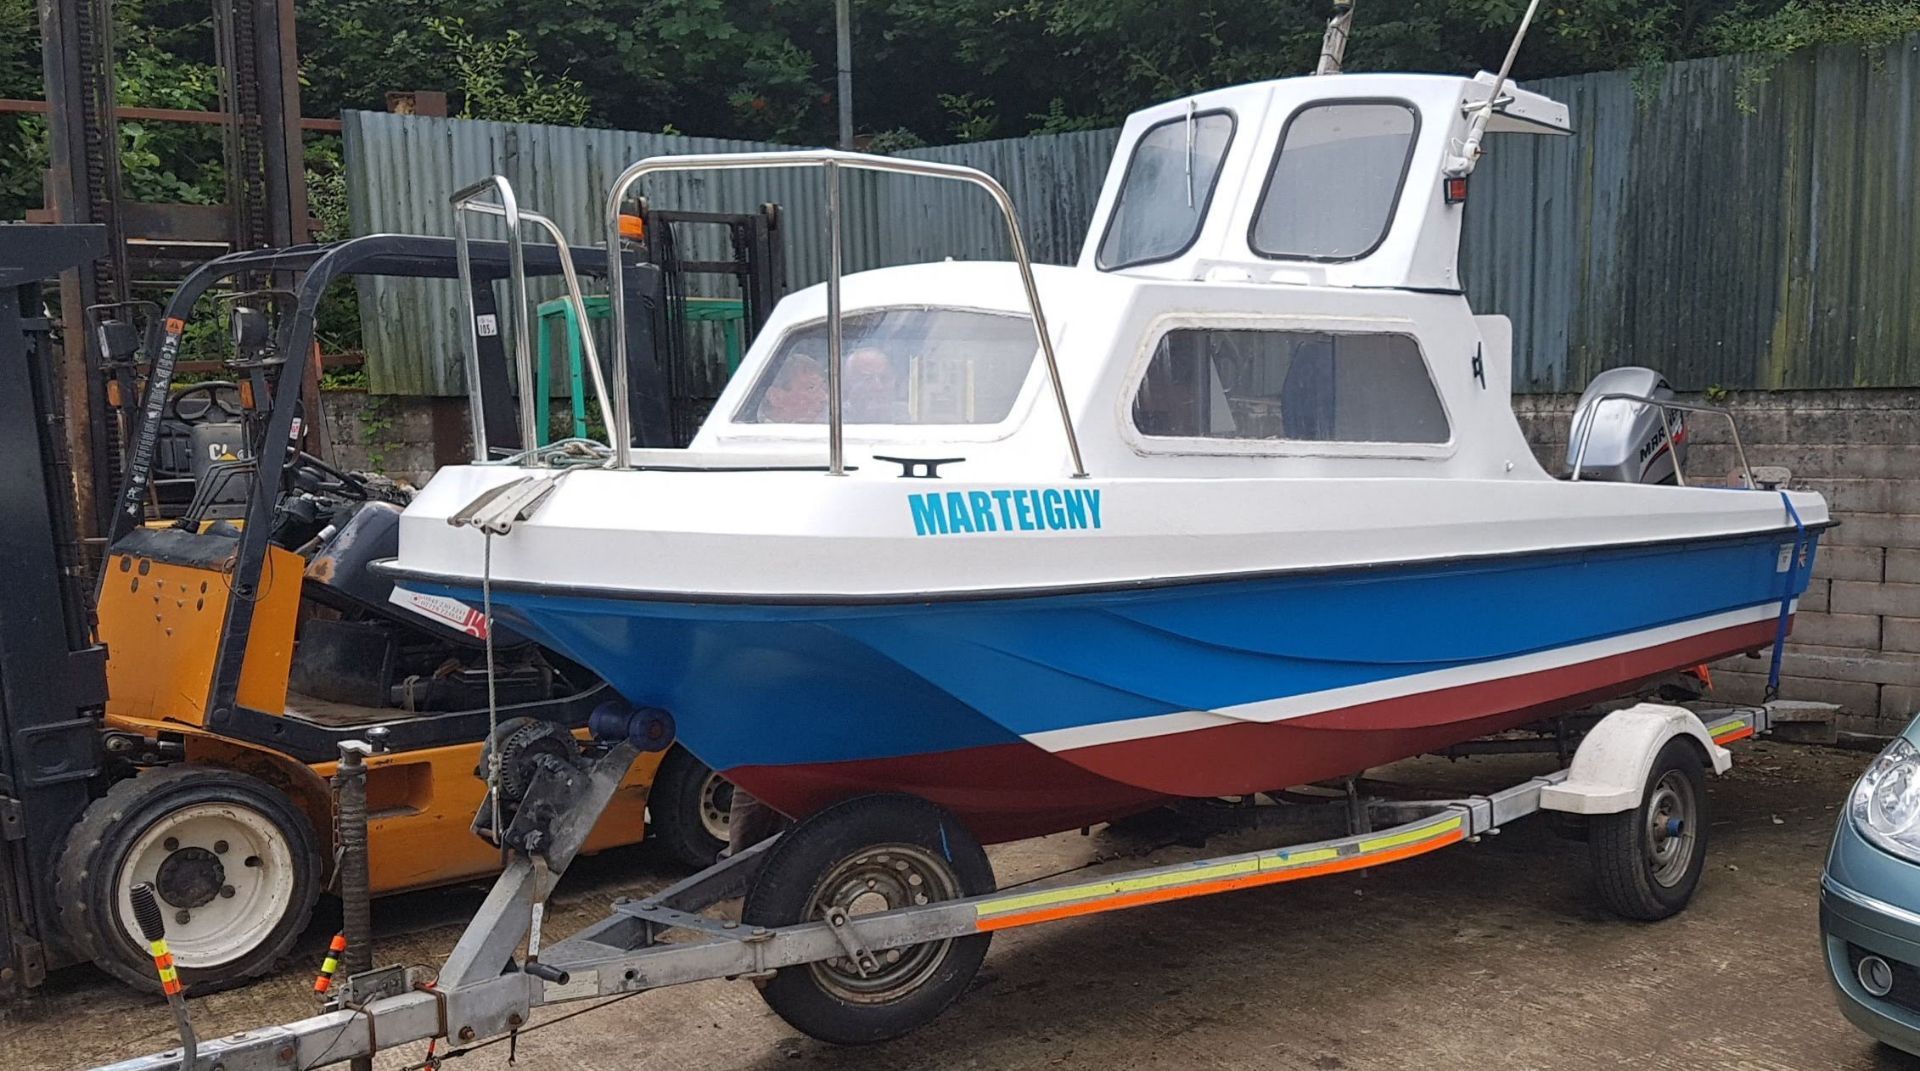 WILSON FLYER 17FT FISHER C/W 2014 MARINER 40HP 4 STROKE OUTBOARD ONLY DONE 30HRS, BRAKED TRAILER